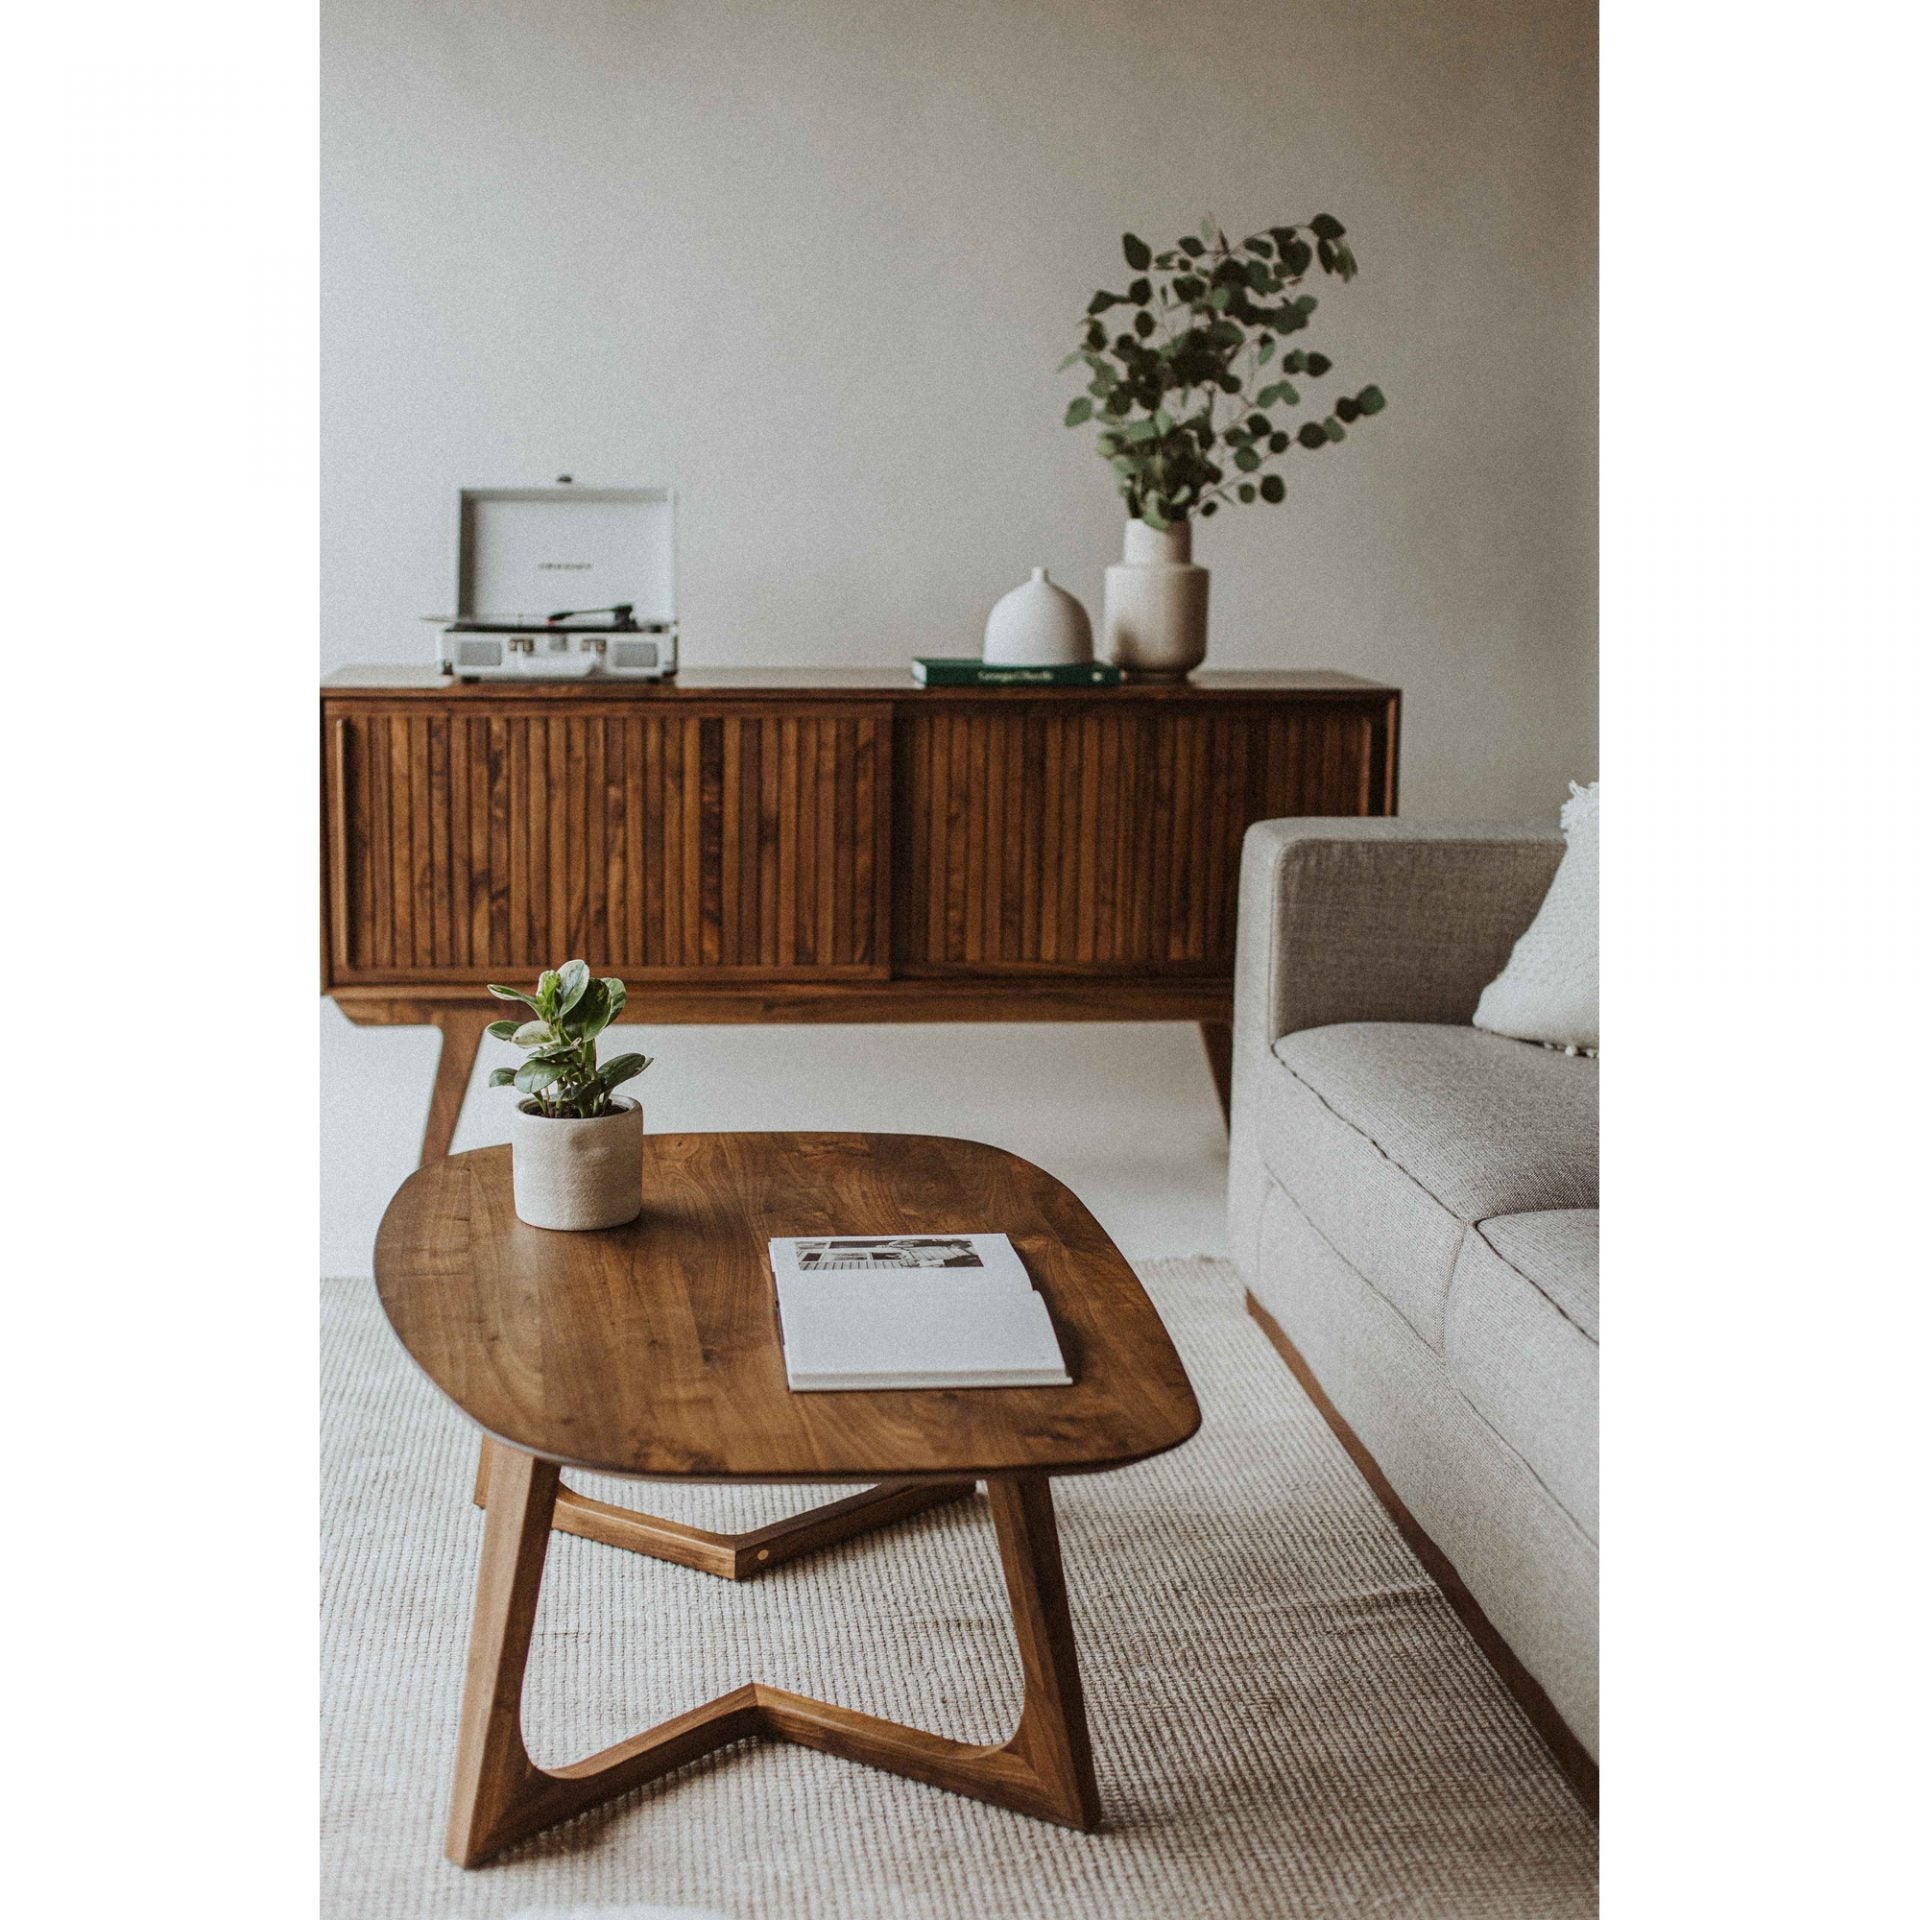 With a solid walnut finish and unique shape, this Godenza Coffee Table is a contemporary take on a mid-century modern classic. Made from solid, high-quality American walnut, this coffee table's warm hues brighten up your space while offering a medium-sized tabletop for your everyday needs.  Size: 42"W x 27.5"D x 15"H